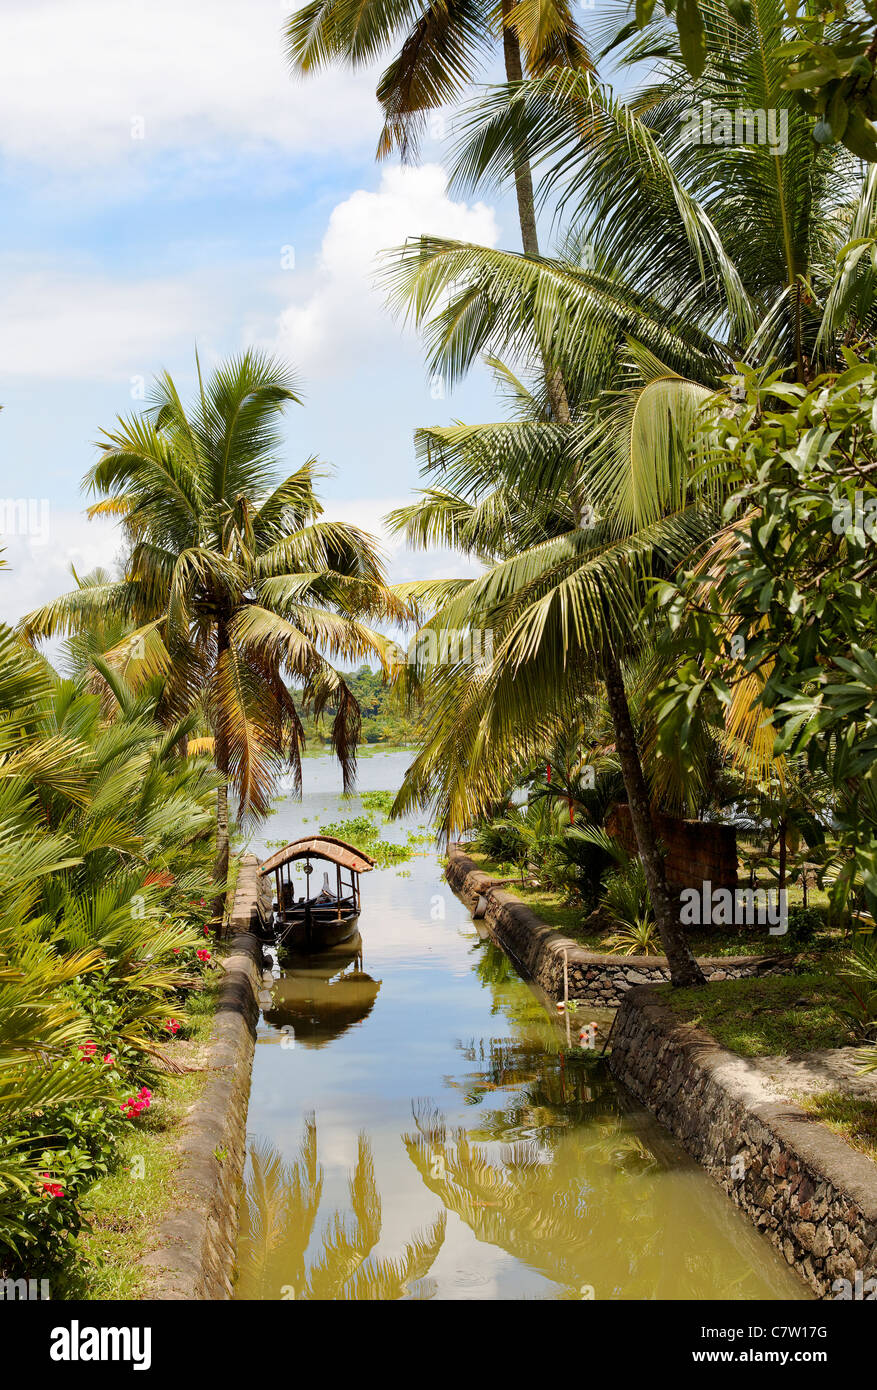 canal scene small taxi boat Kerala backwaters India, coconut trees, palm leaves, flora, water, lake, relections, blue sky artery Stock Photo